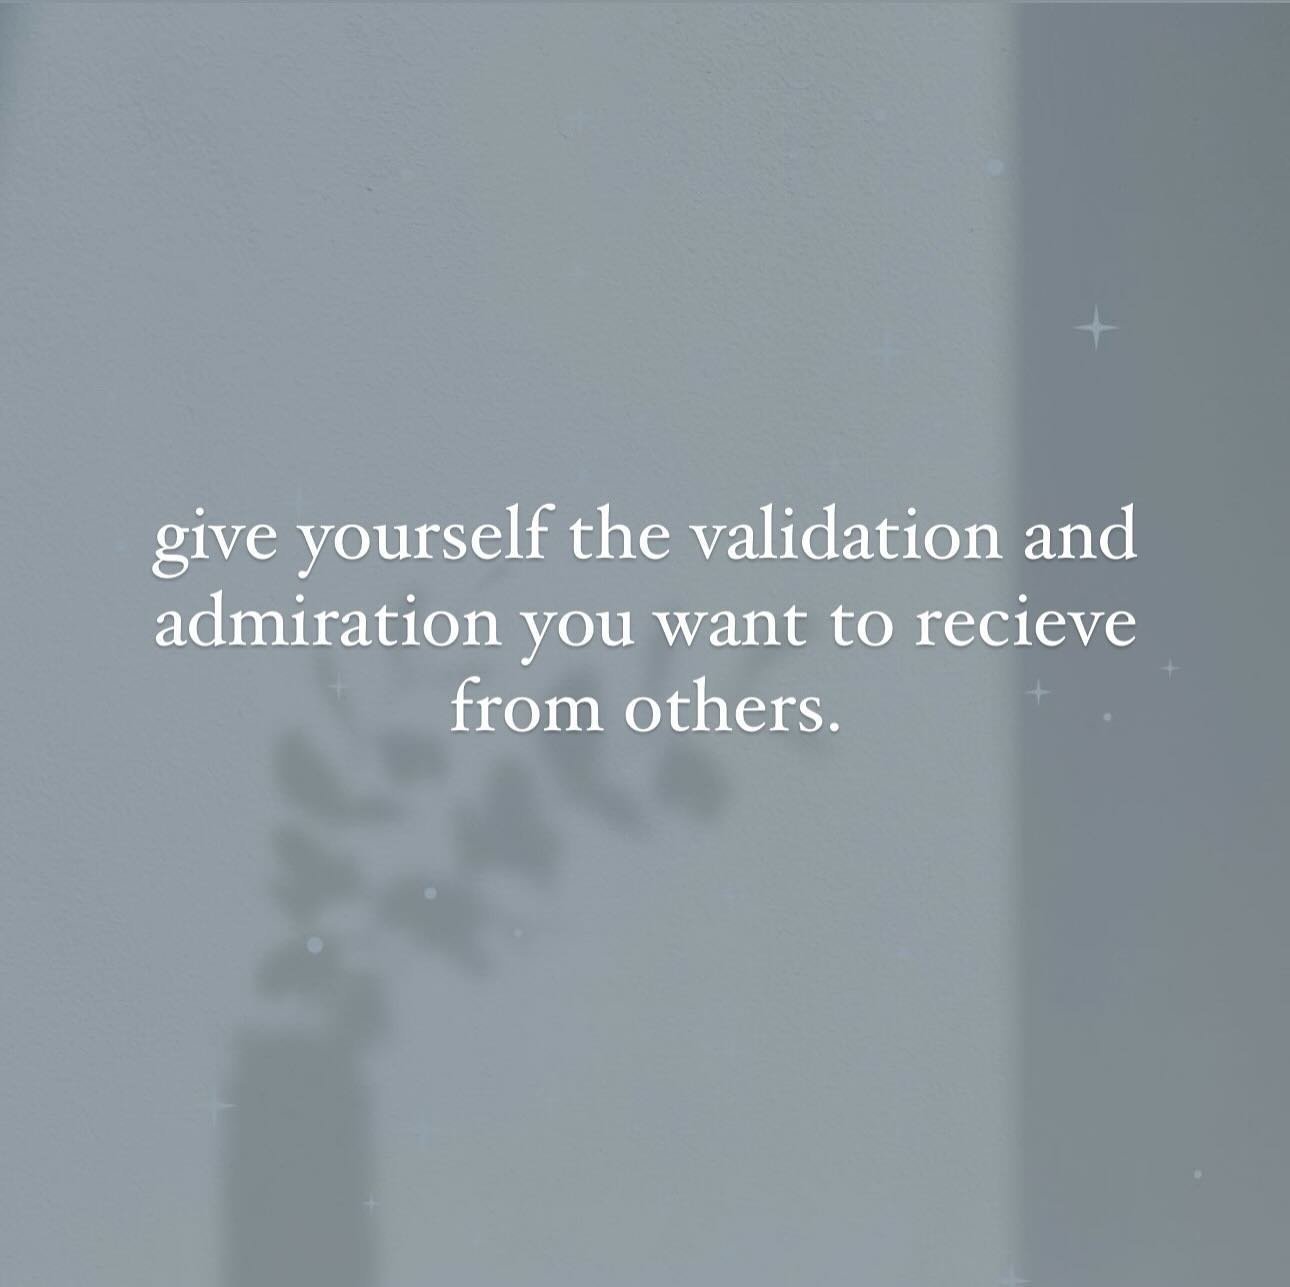 Not to self: give to yourself what you want from others 💖 #personaldevelopment #selfvalidation #selfworth #selflove